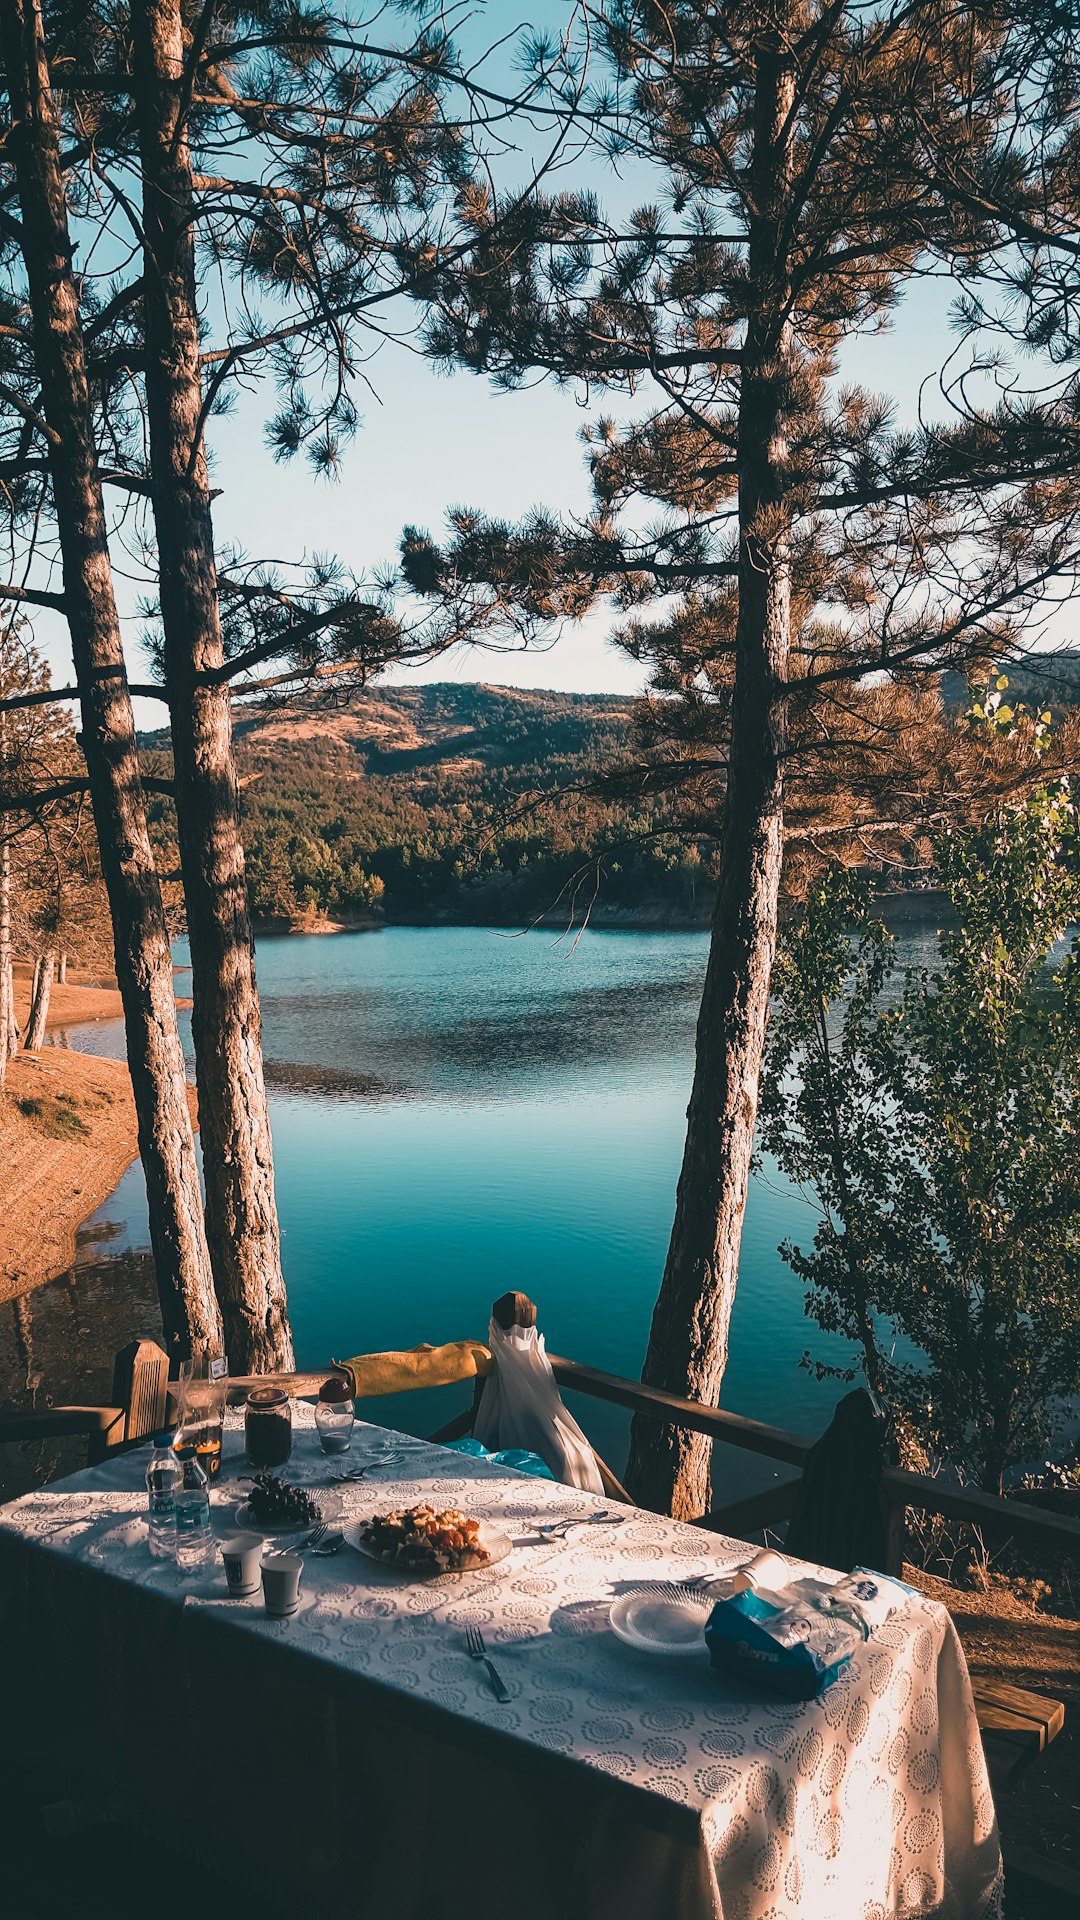 Outdoor Activities Pictures | Download Free Images on Unsplash